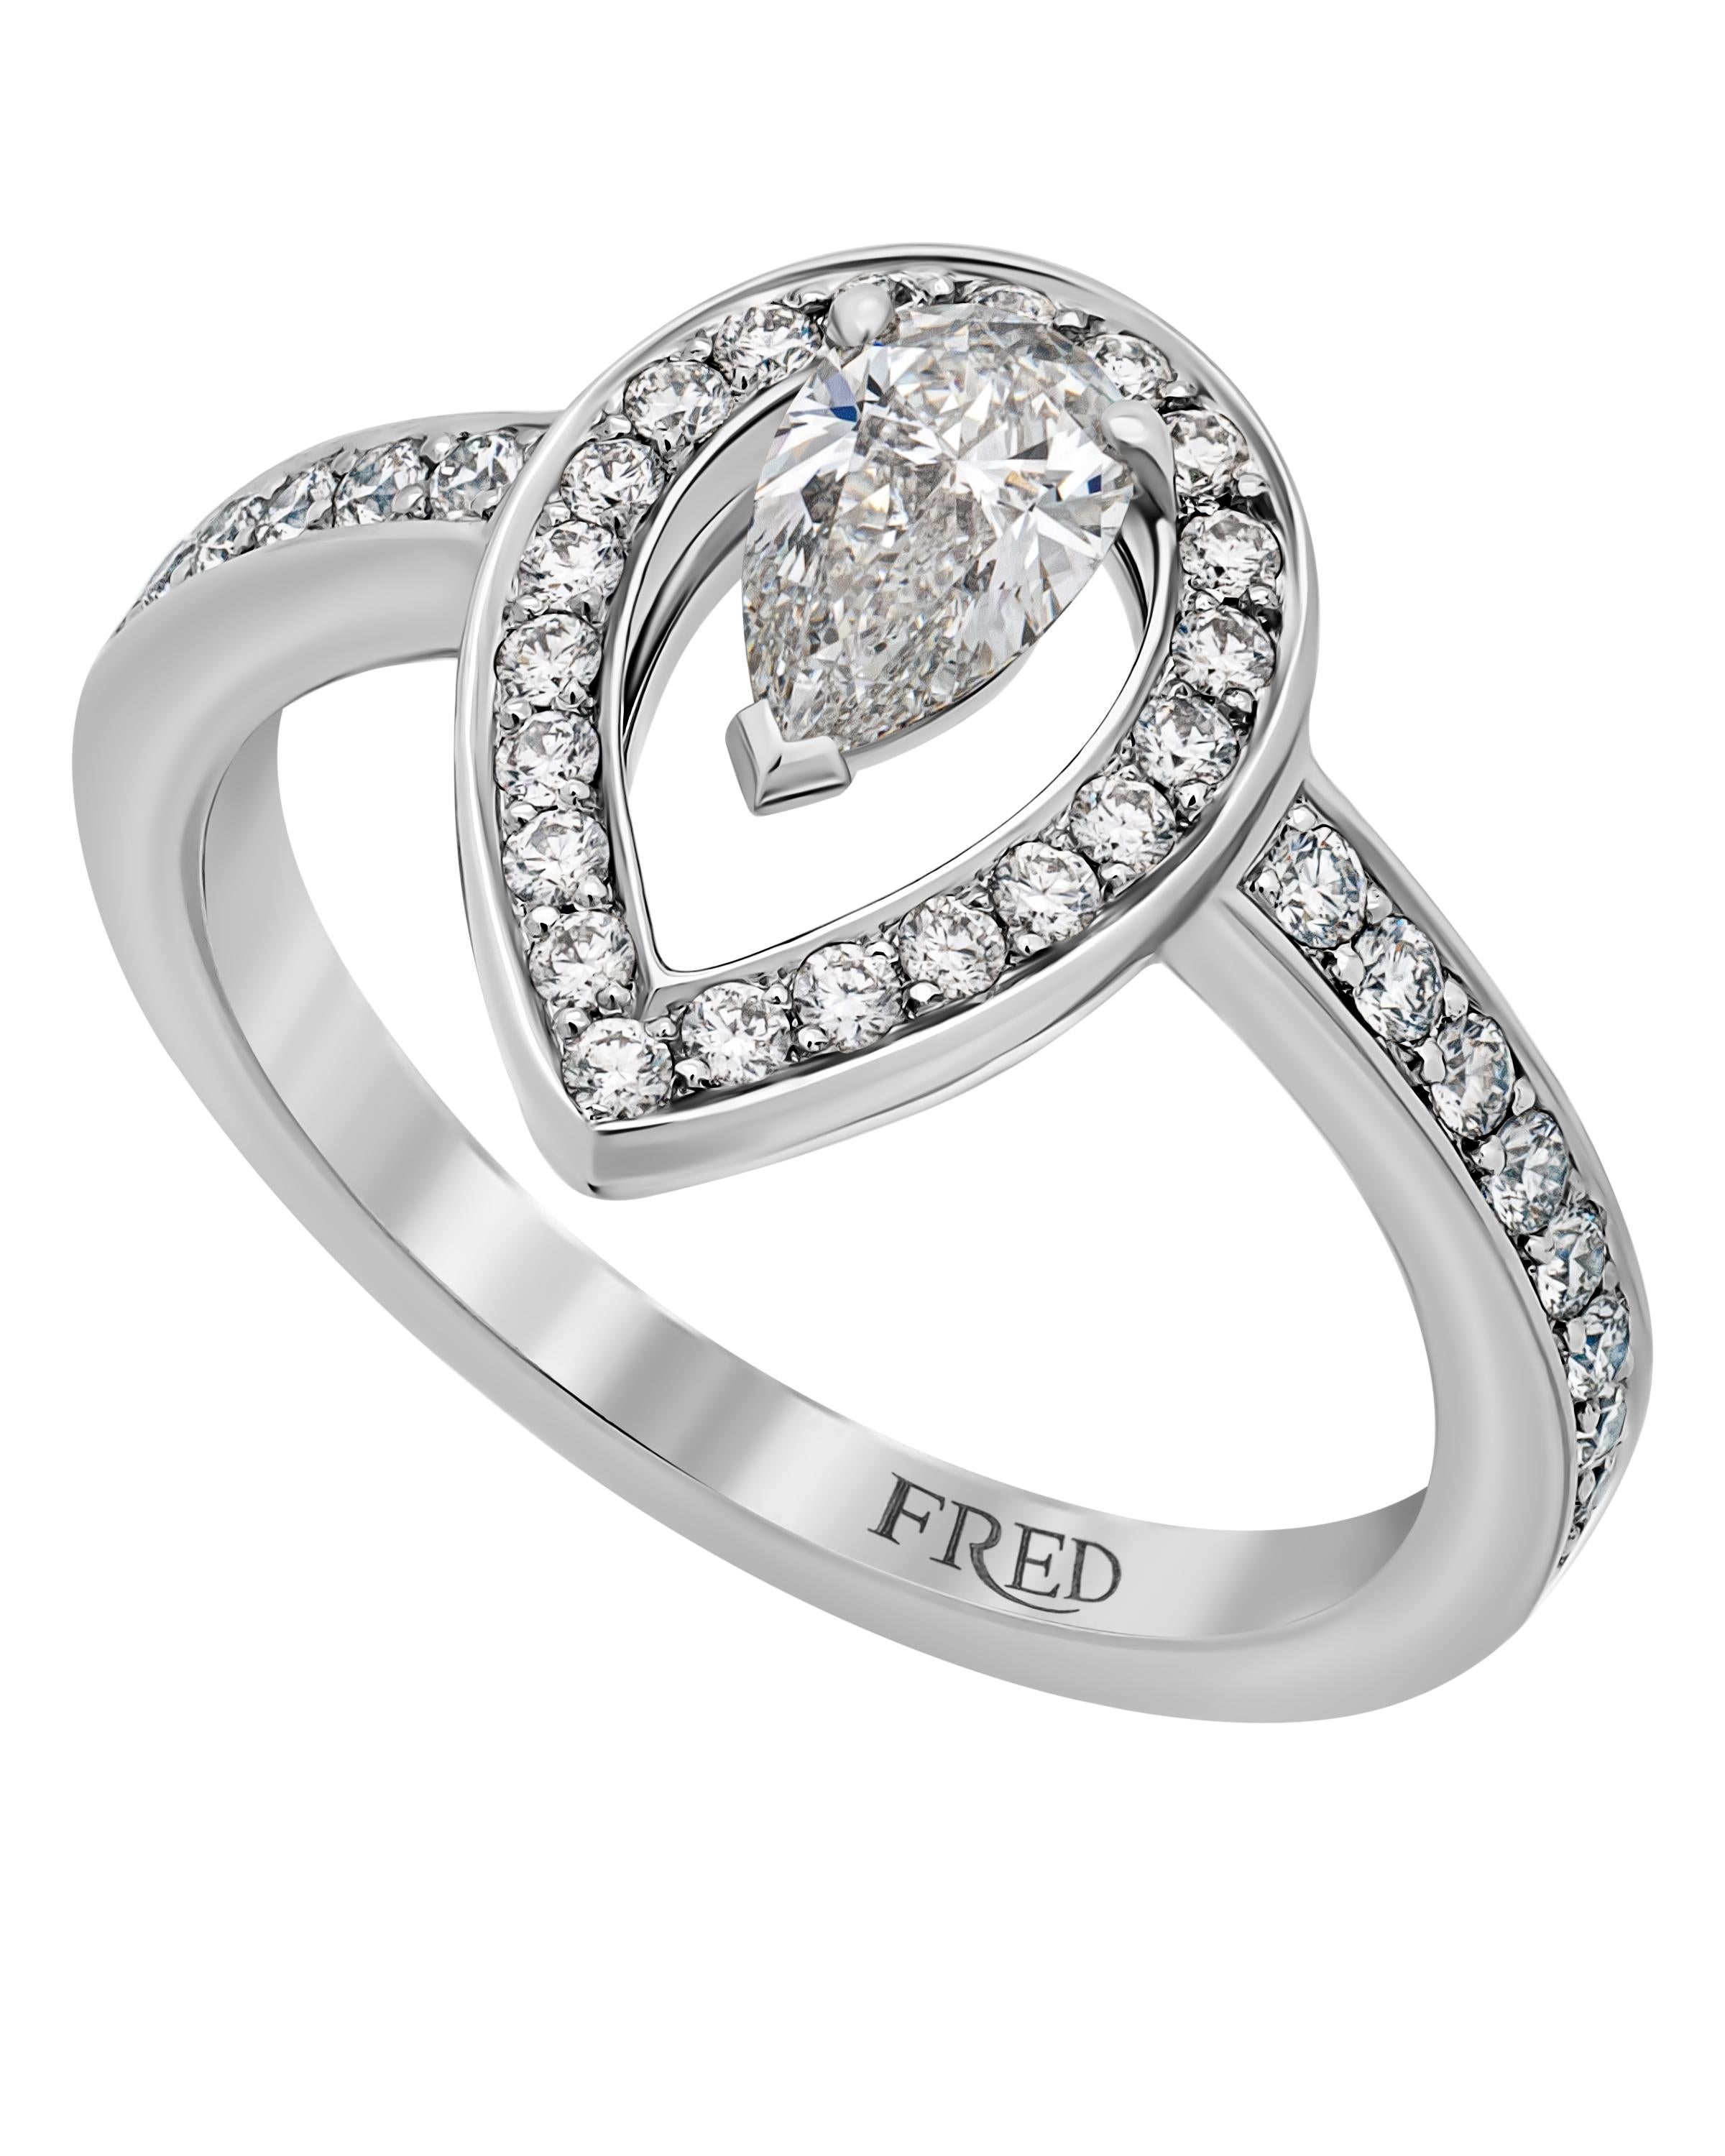 FRED Lovelight platinum engagement ring features a GIA certified 0.31ct. pear cut diamond center with color and clarity: E, VVS1 shimmering with 0.35ct. tw. pavé diamonds. The ring size is 5.75 (51.3). The weight is 4.13g.
